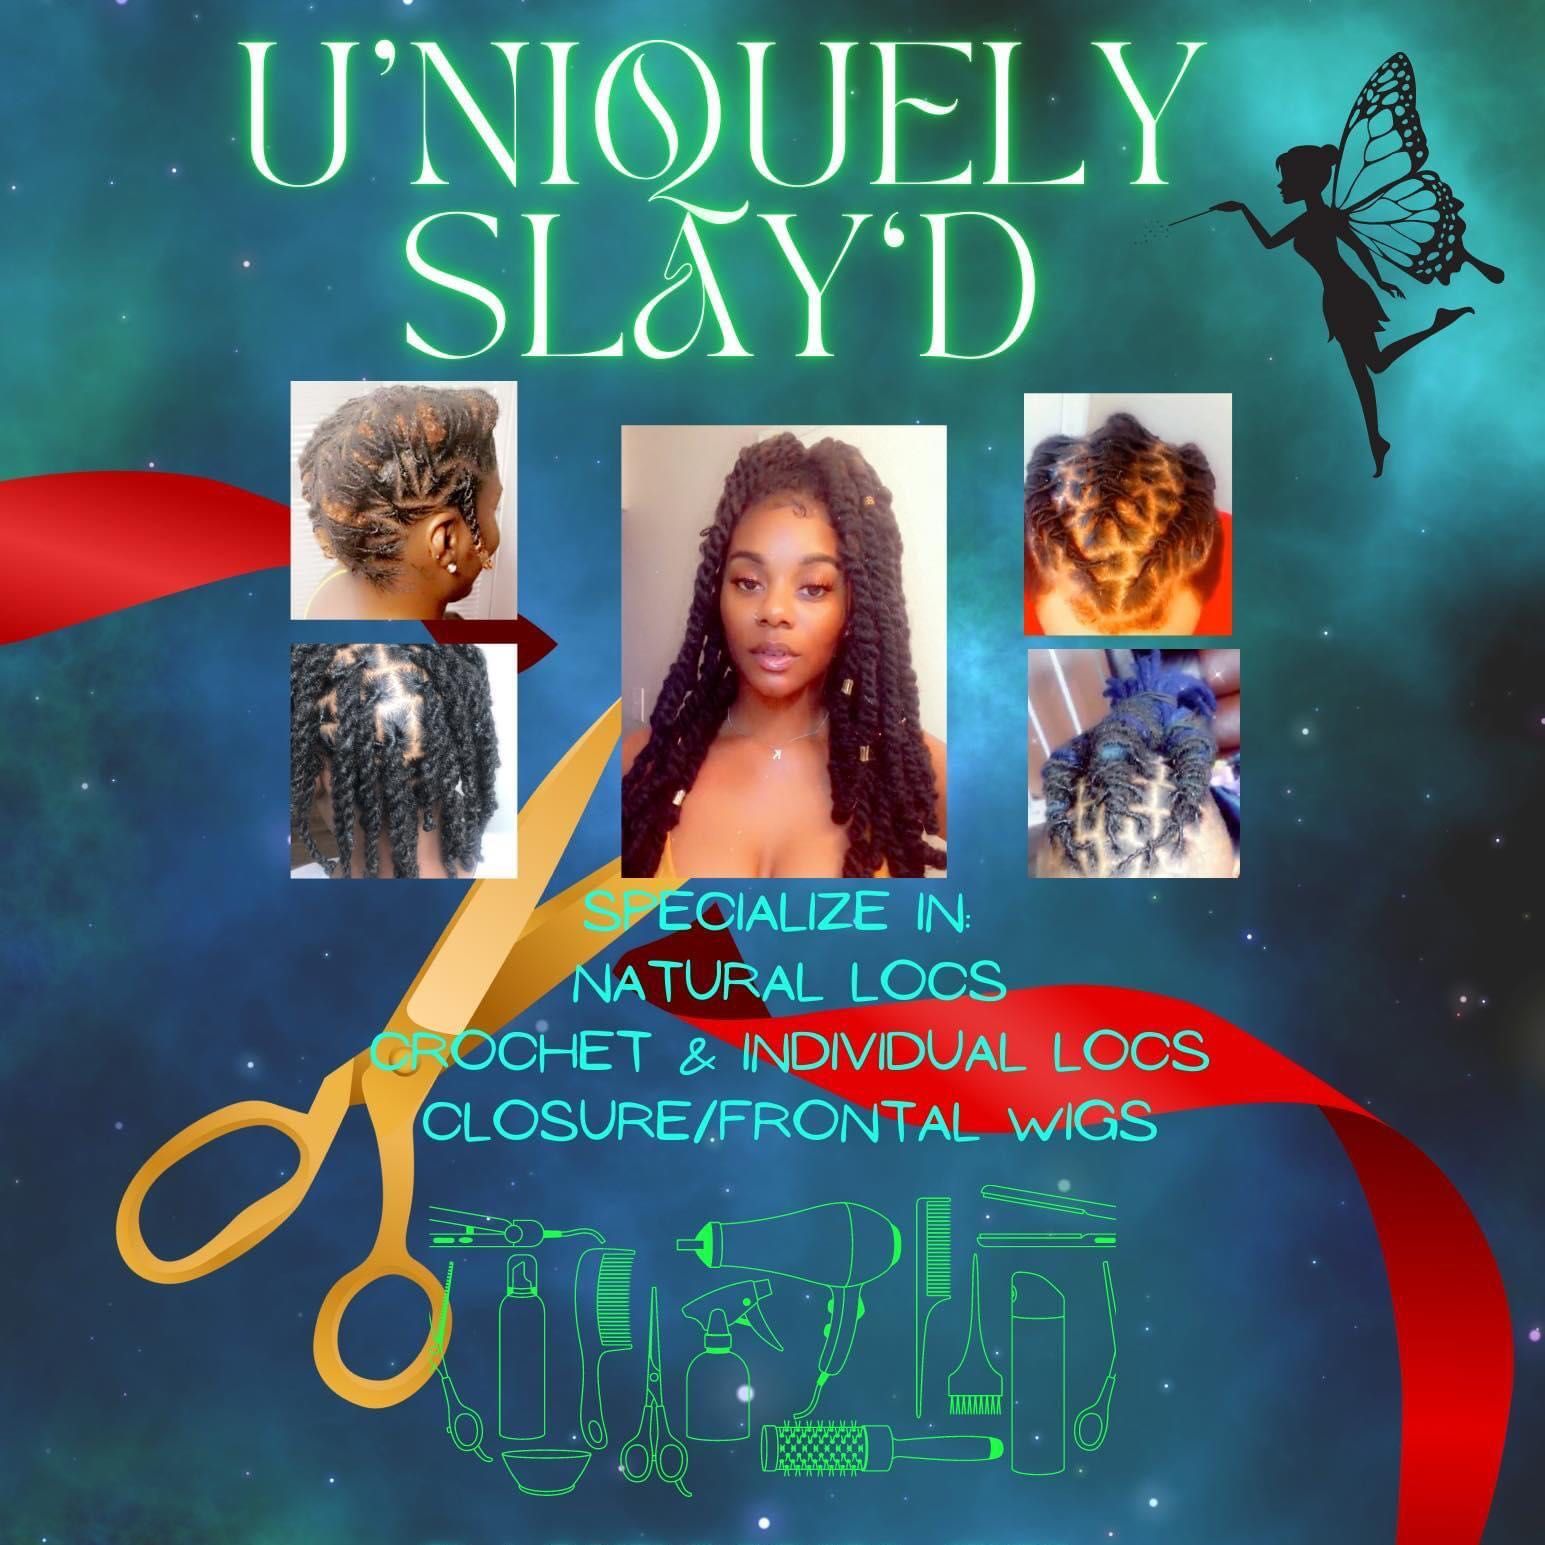 U'Niquely Slay'd, Near Mesa Dr, Will Send exact day before appointment, Houston, 77078